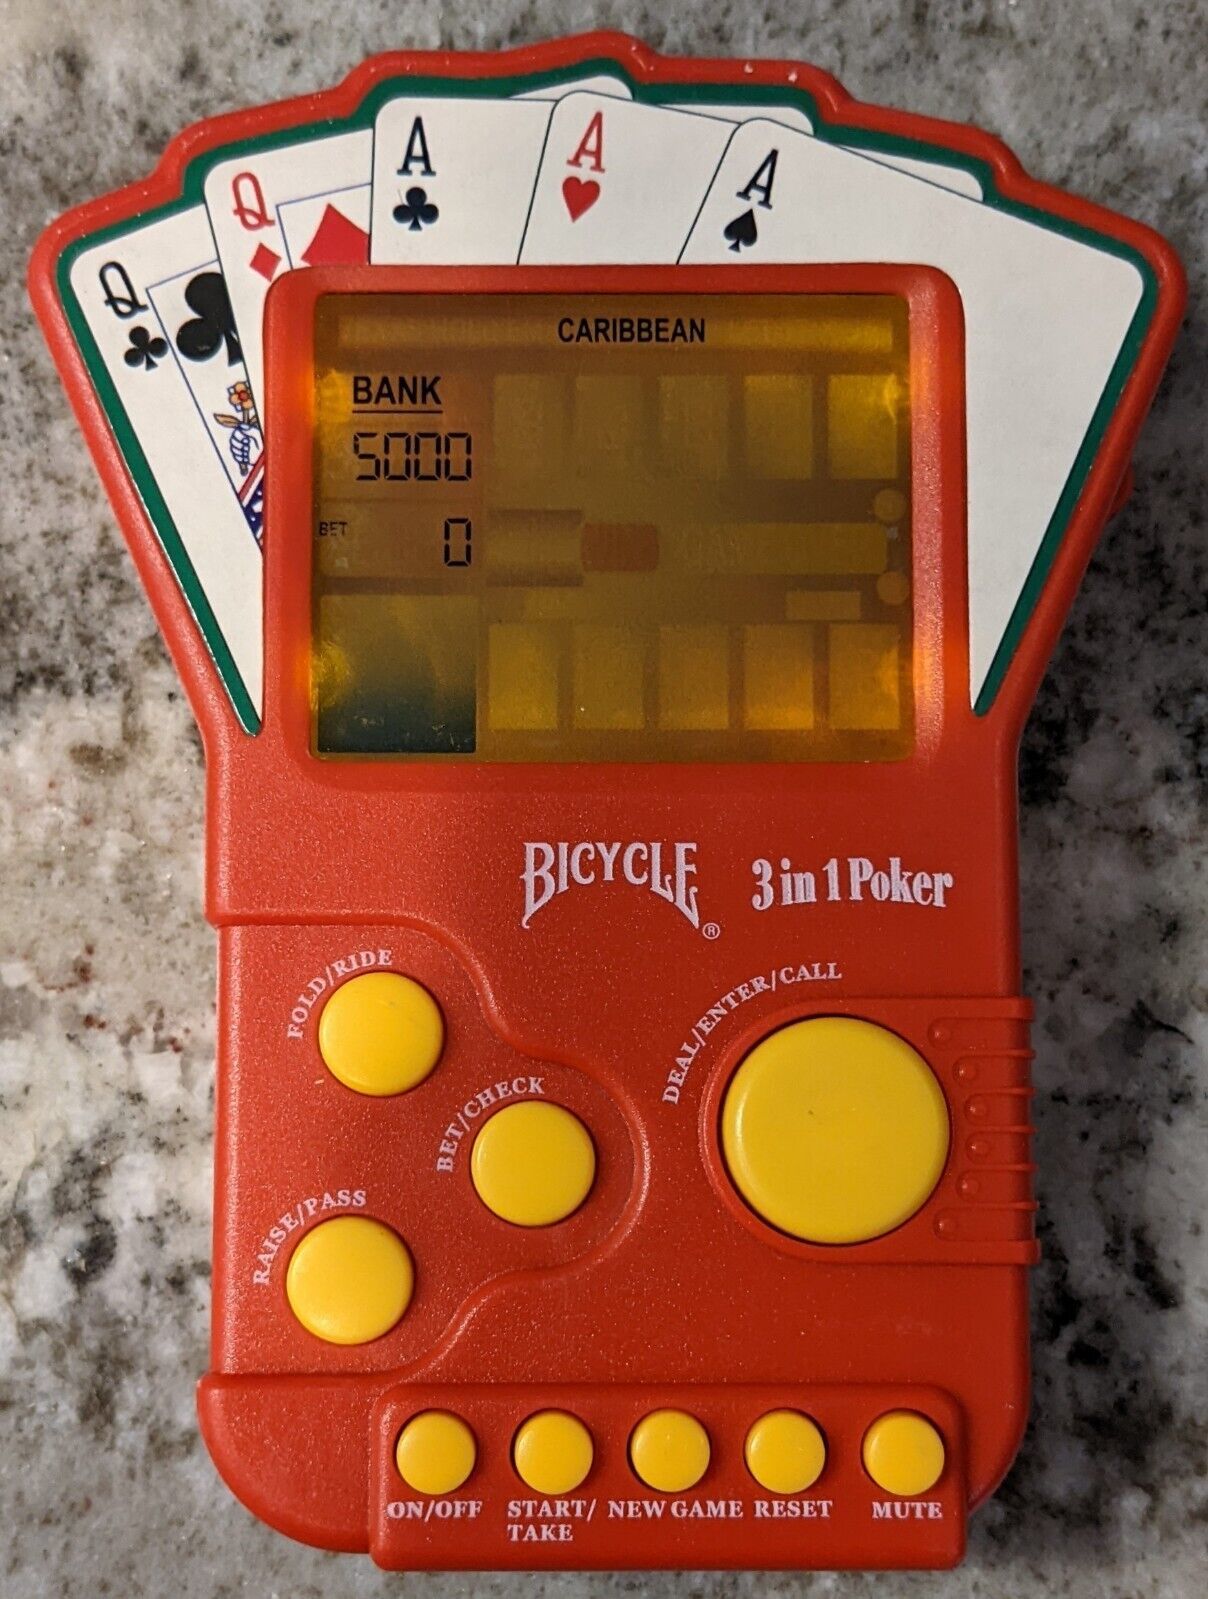 Techno Source 2004 Bicycle 3 in 1 Poker Handheld Electronic Game, TESTED - $6.99